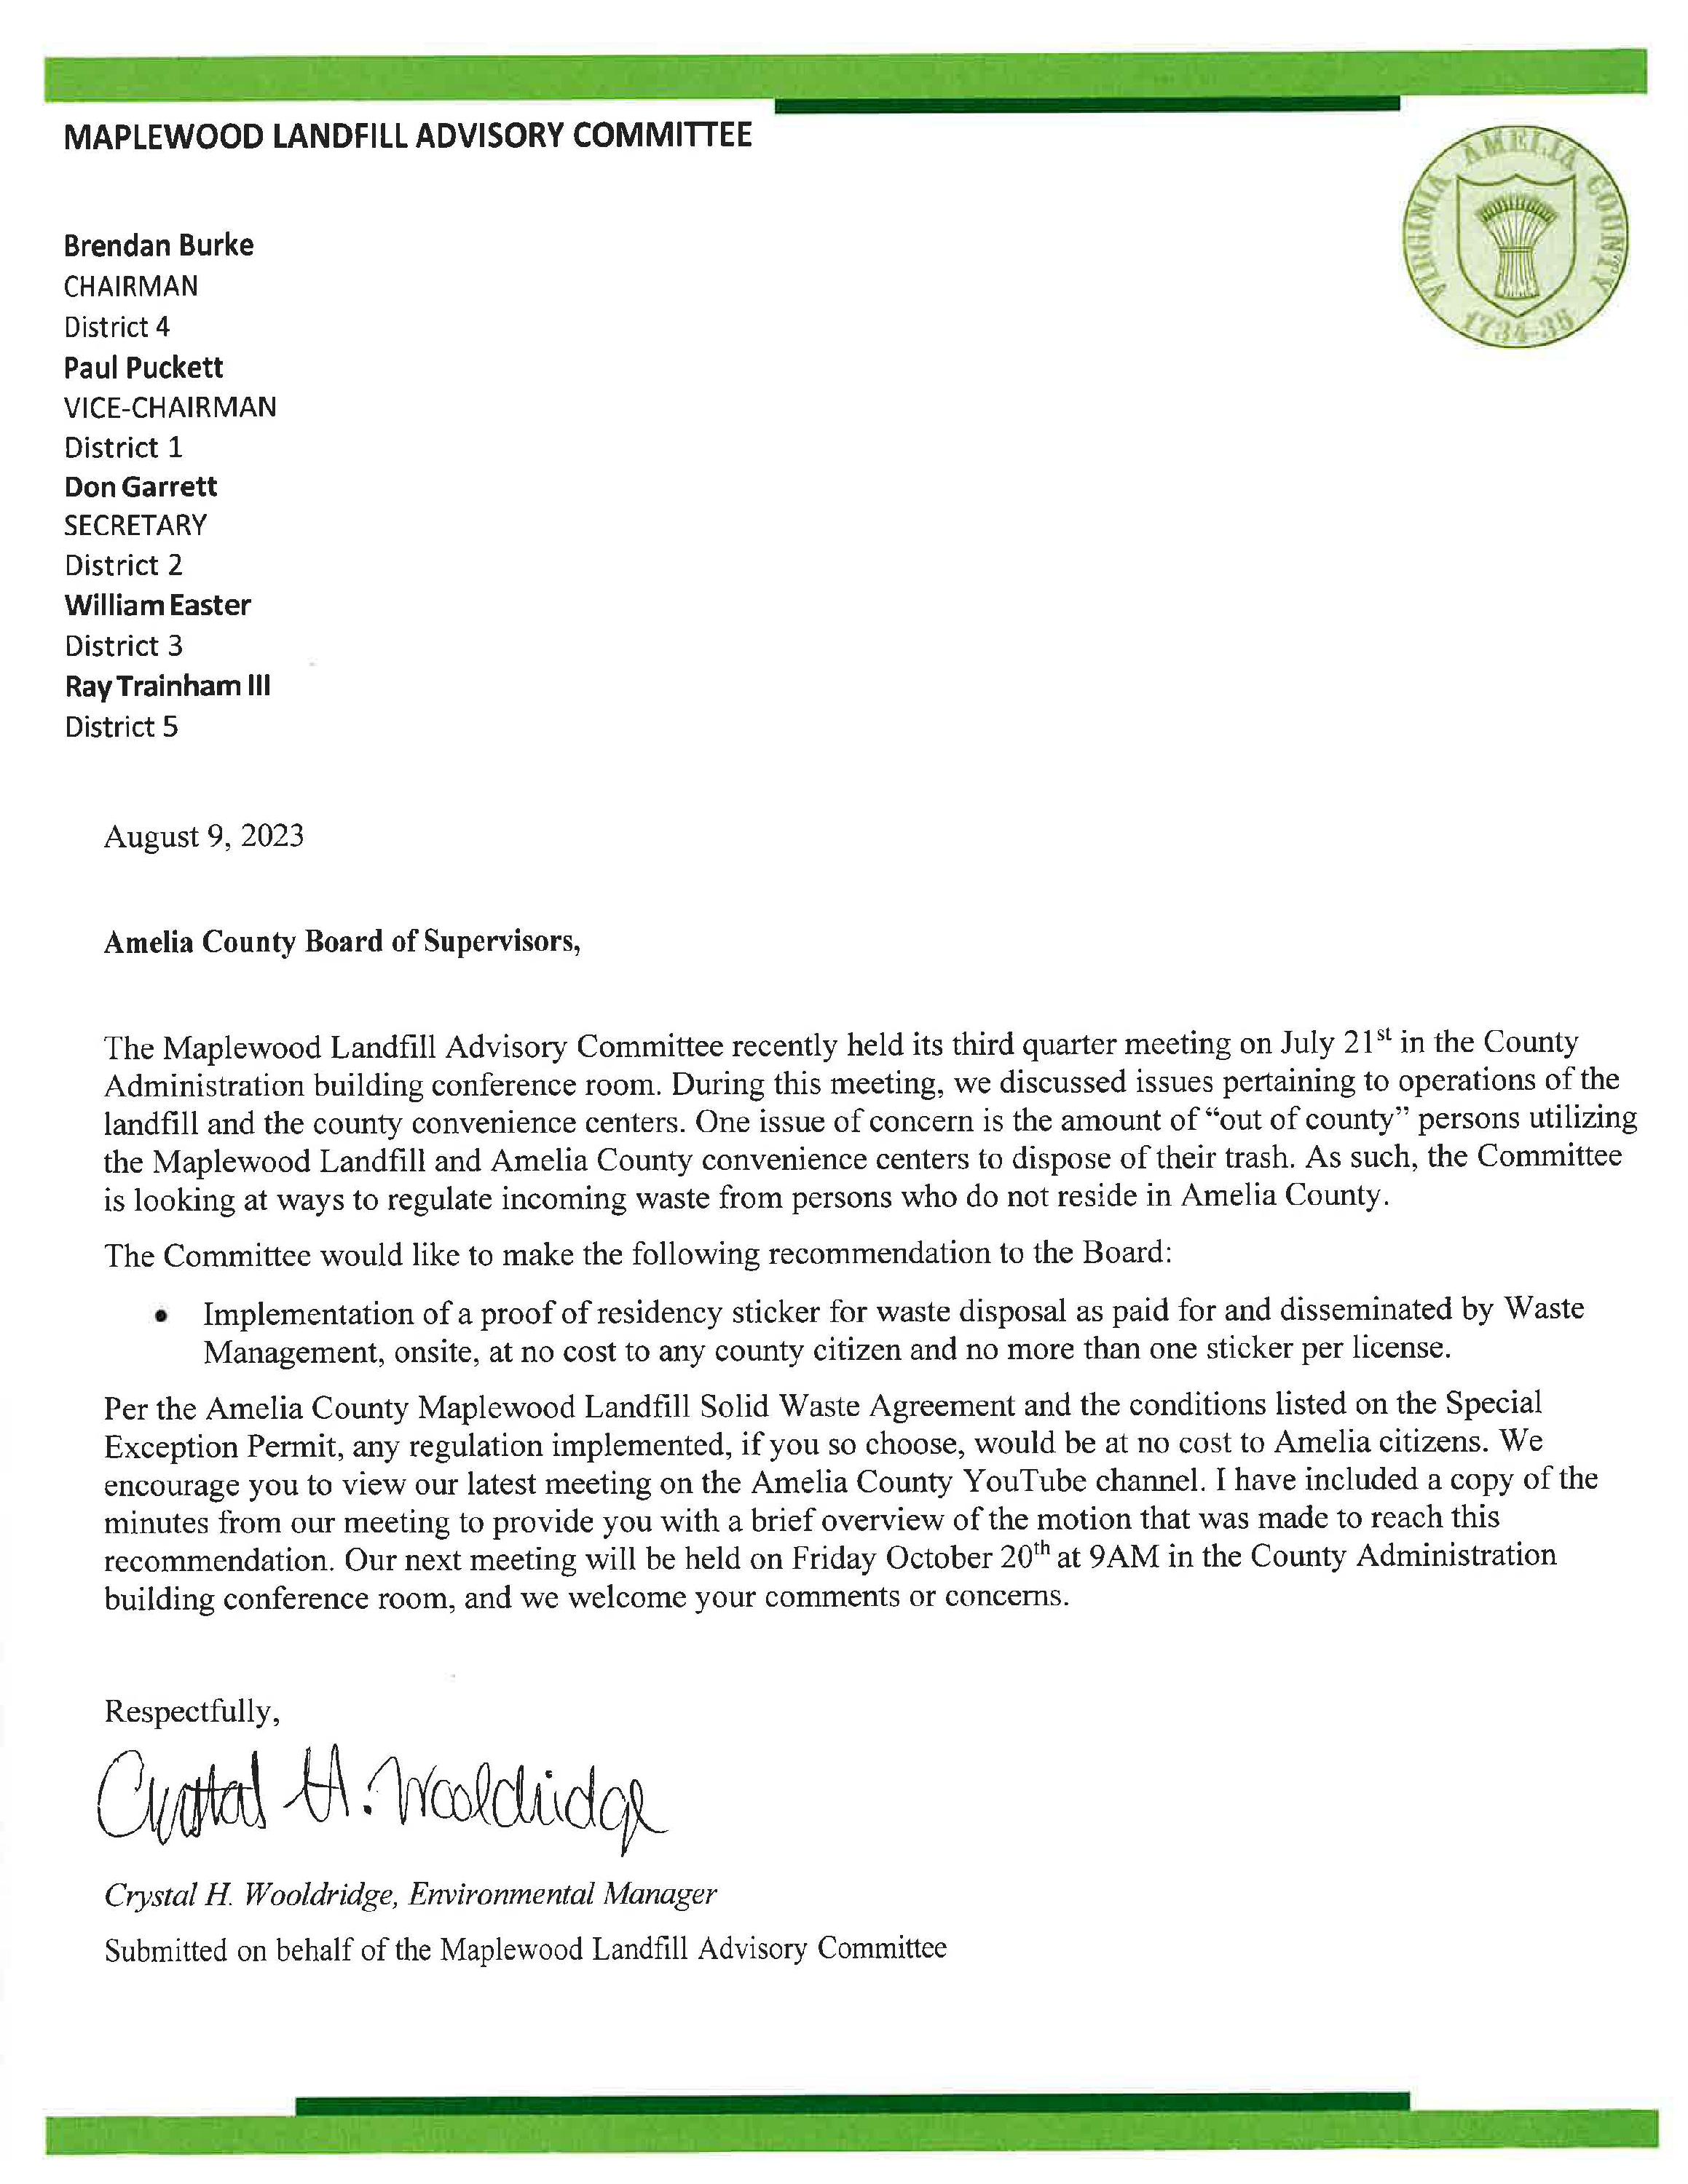 LAC Letter to the Board